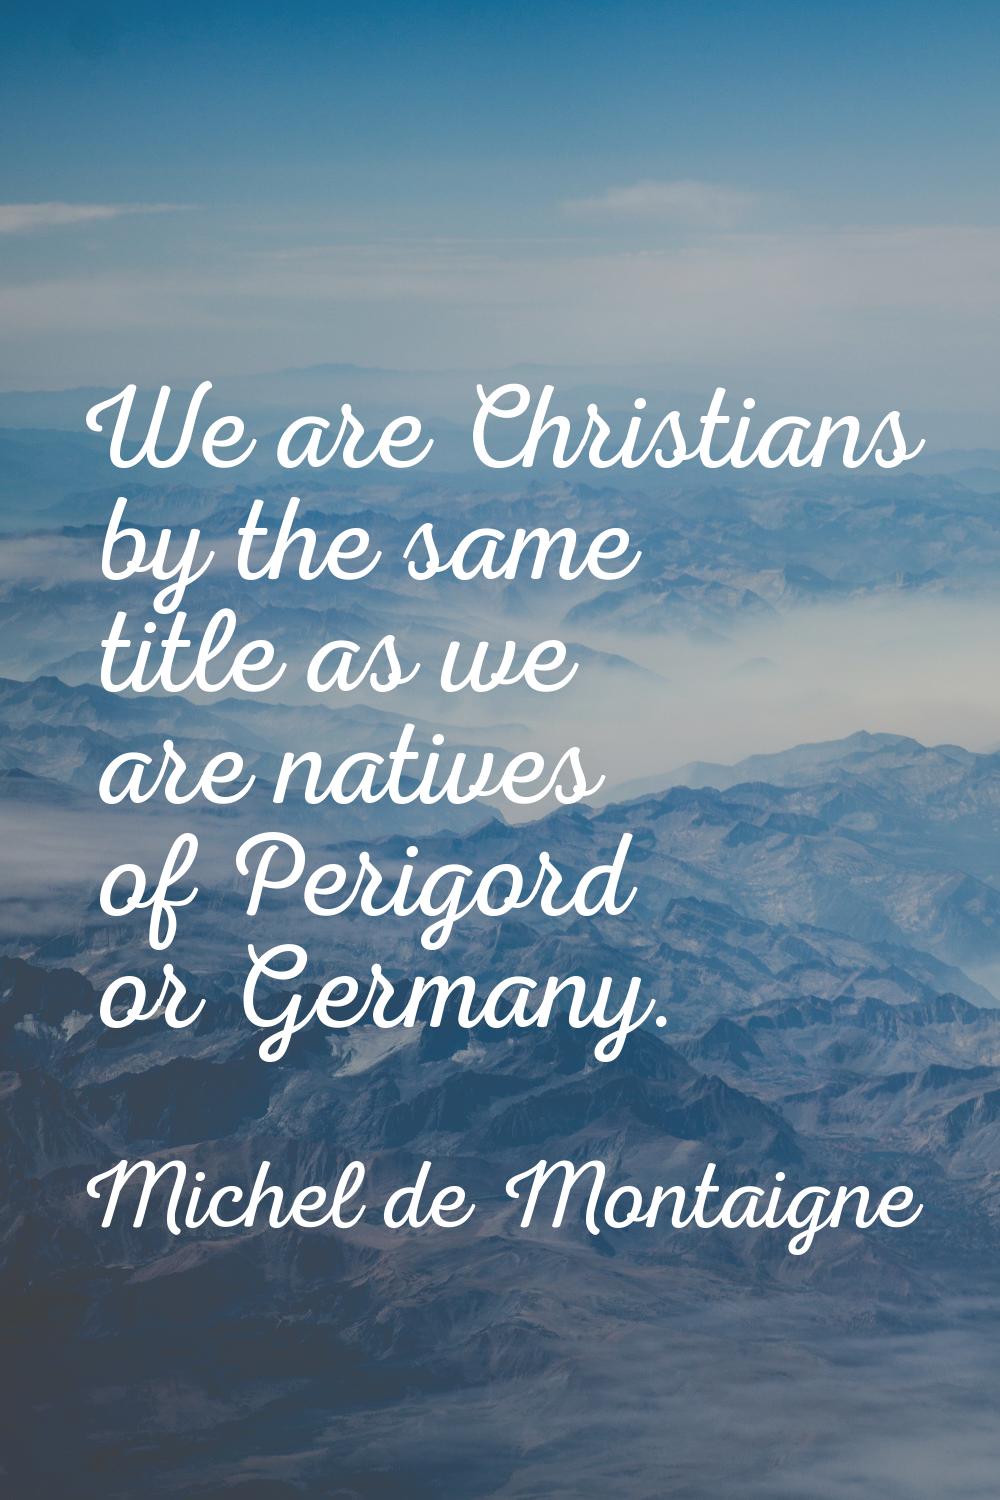 We are Christians by the same title as we are natives of Perigord or Germany.